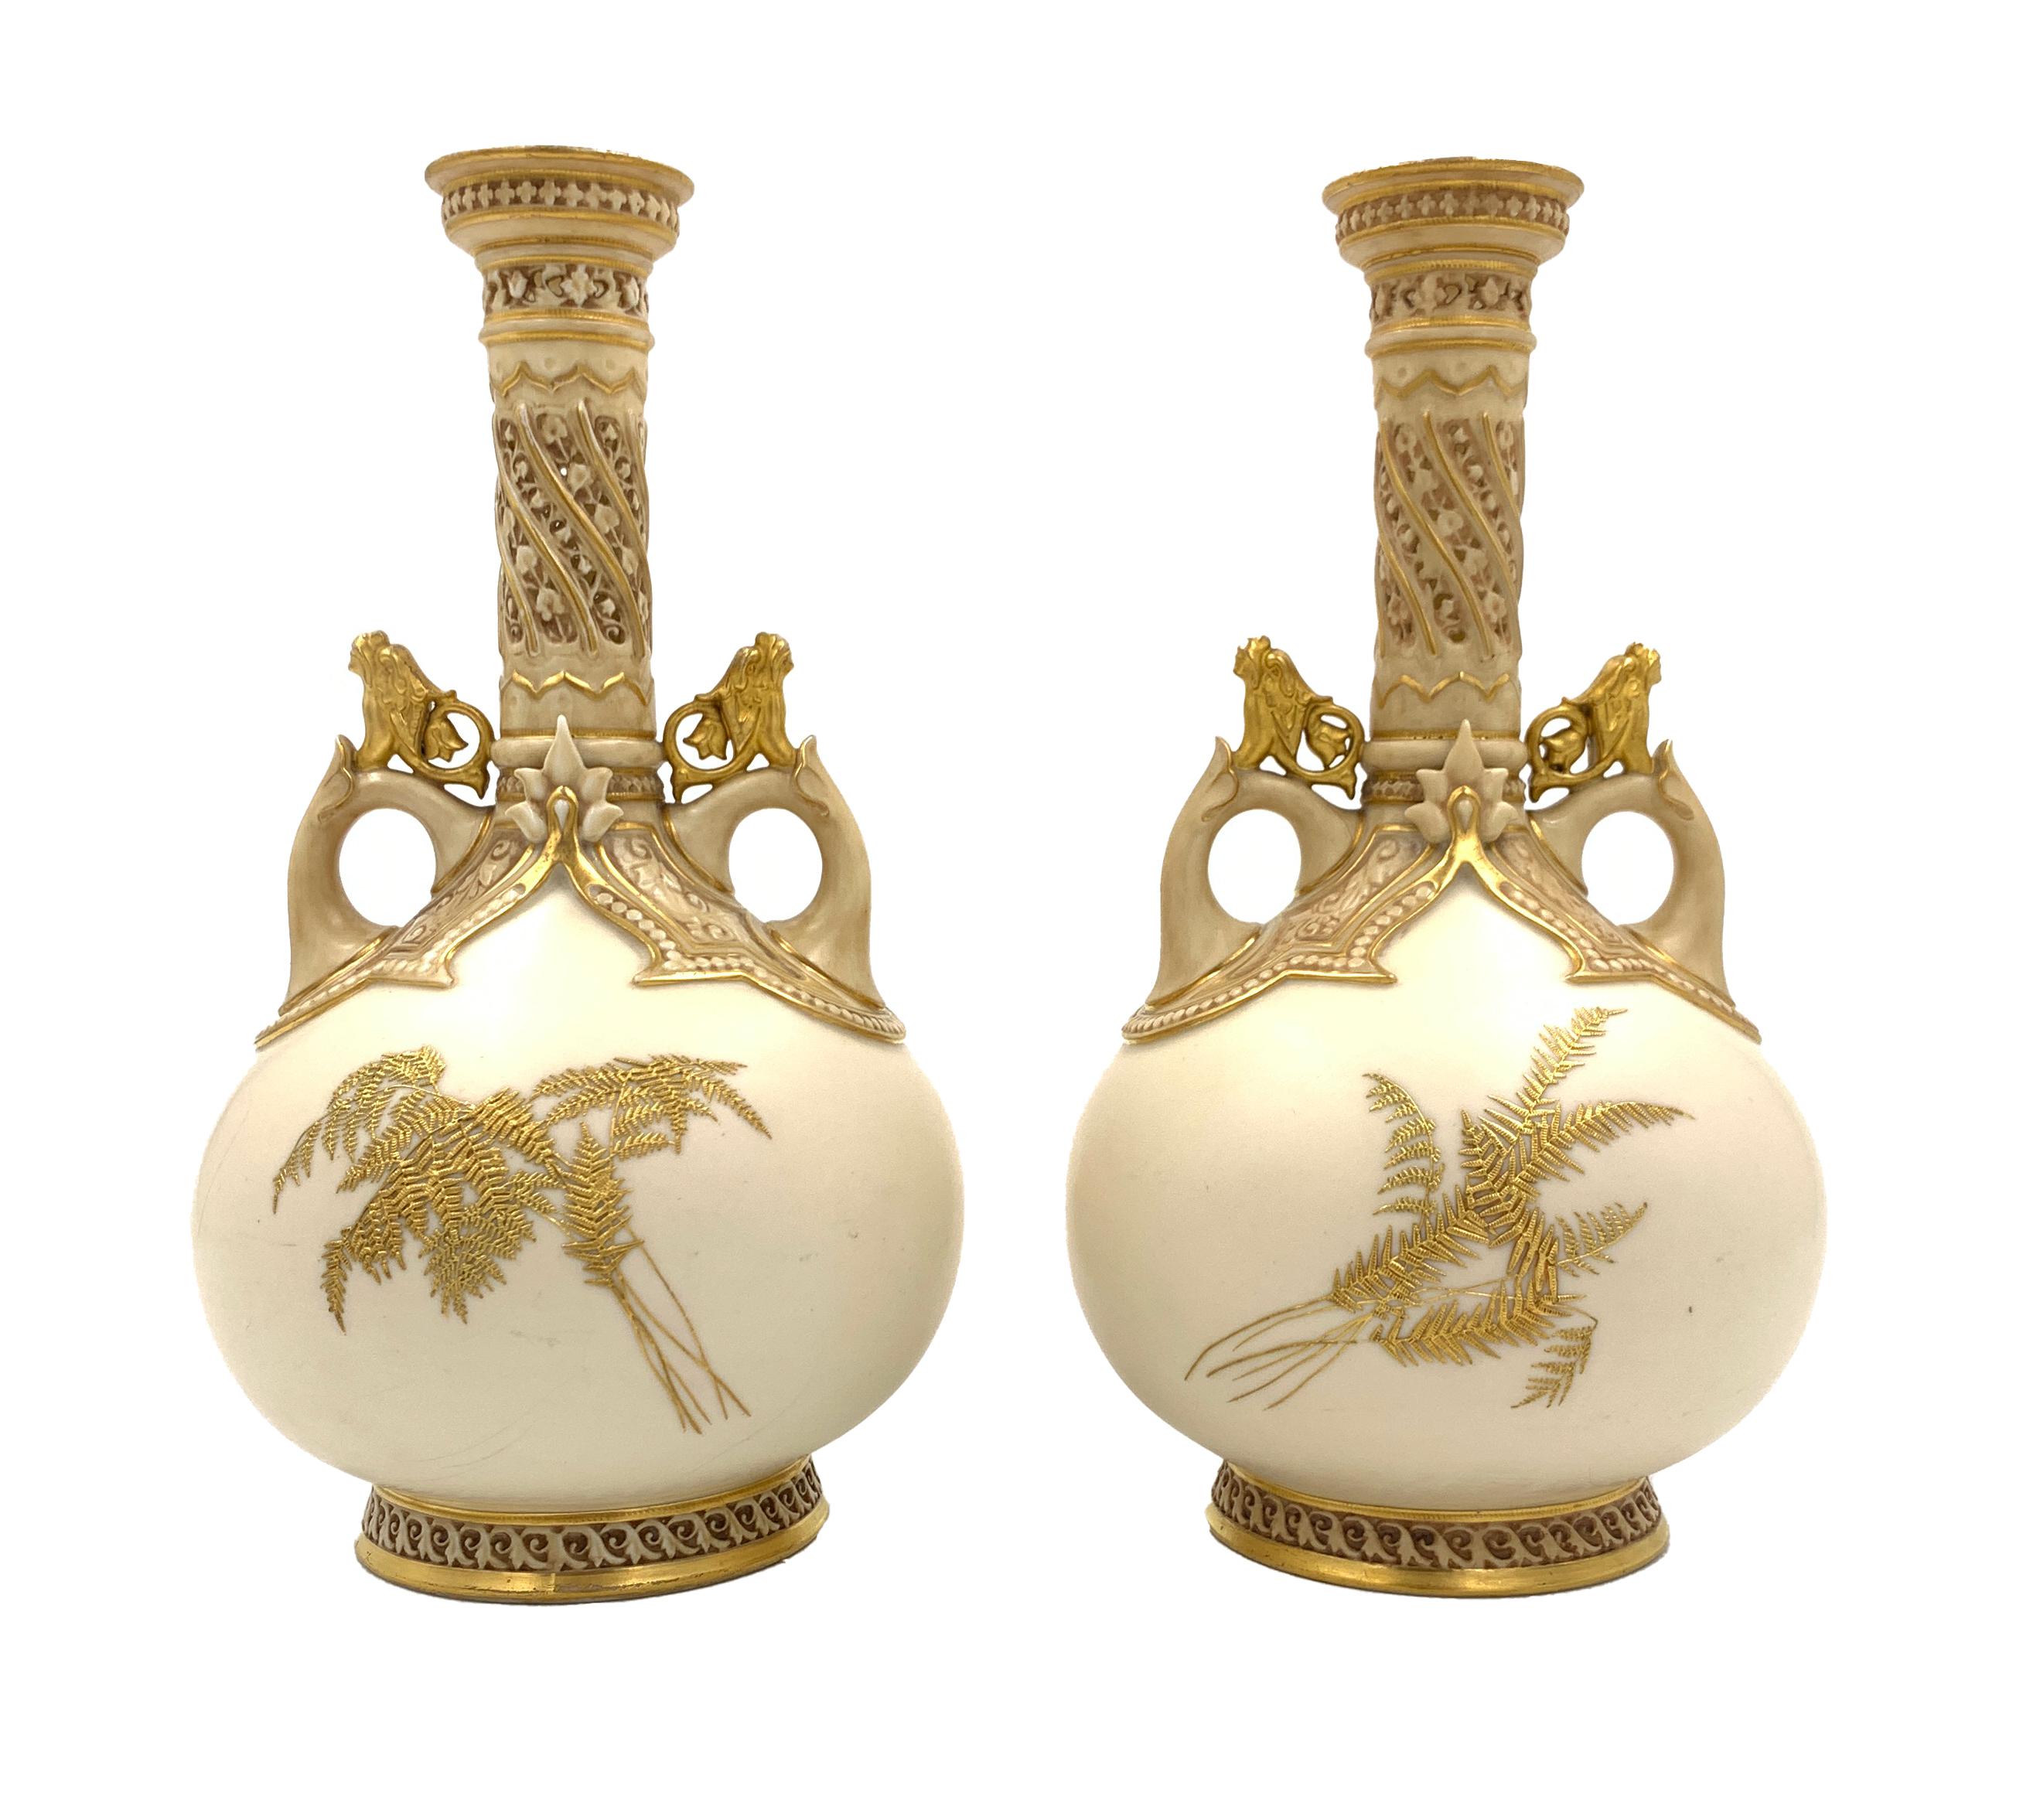 English Pair of Japanese Style Gilt Decorated Royal Worcester Porcelain Vases